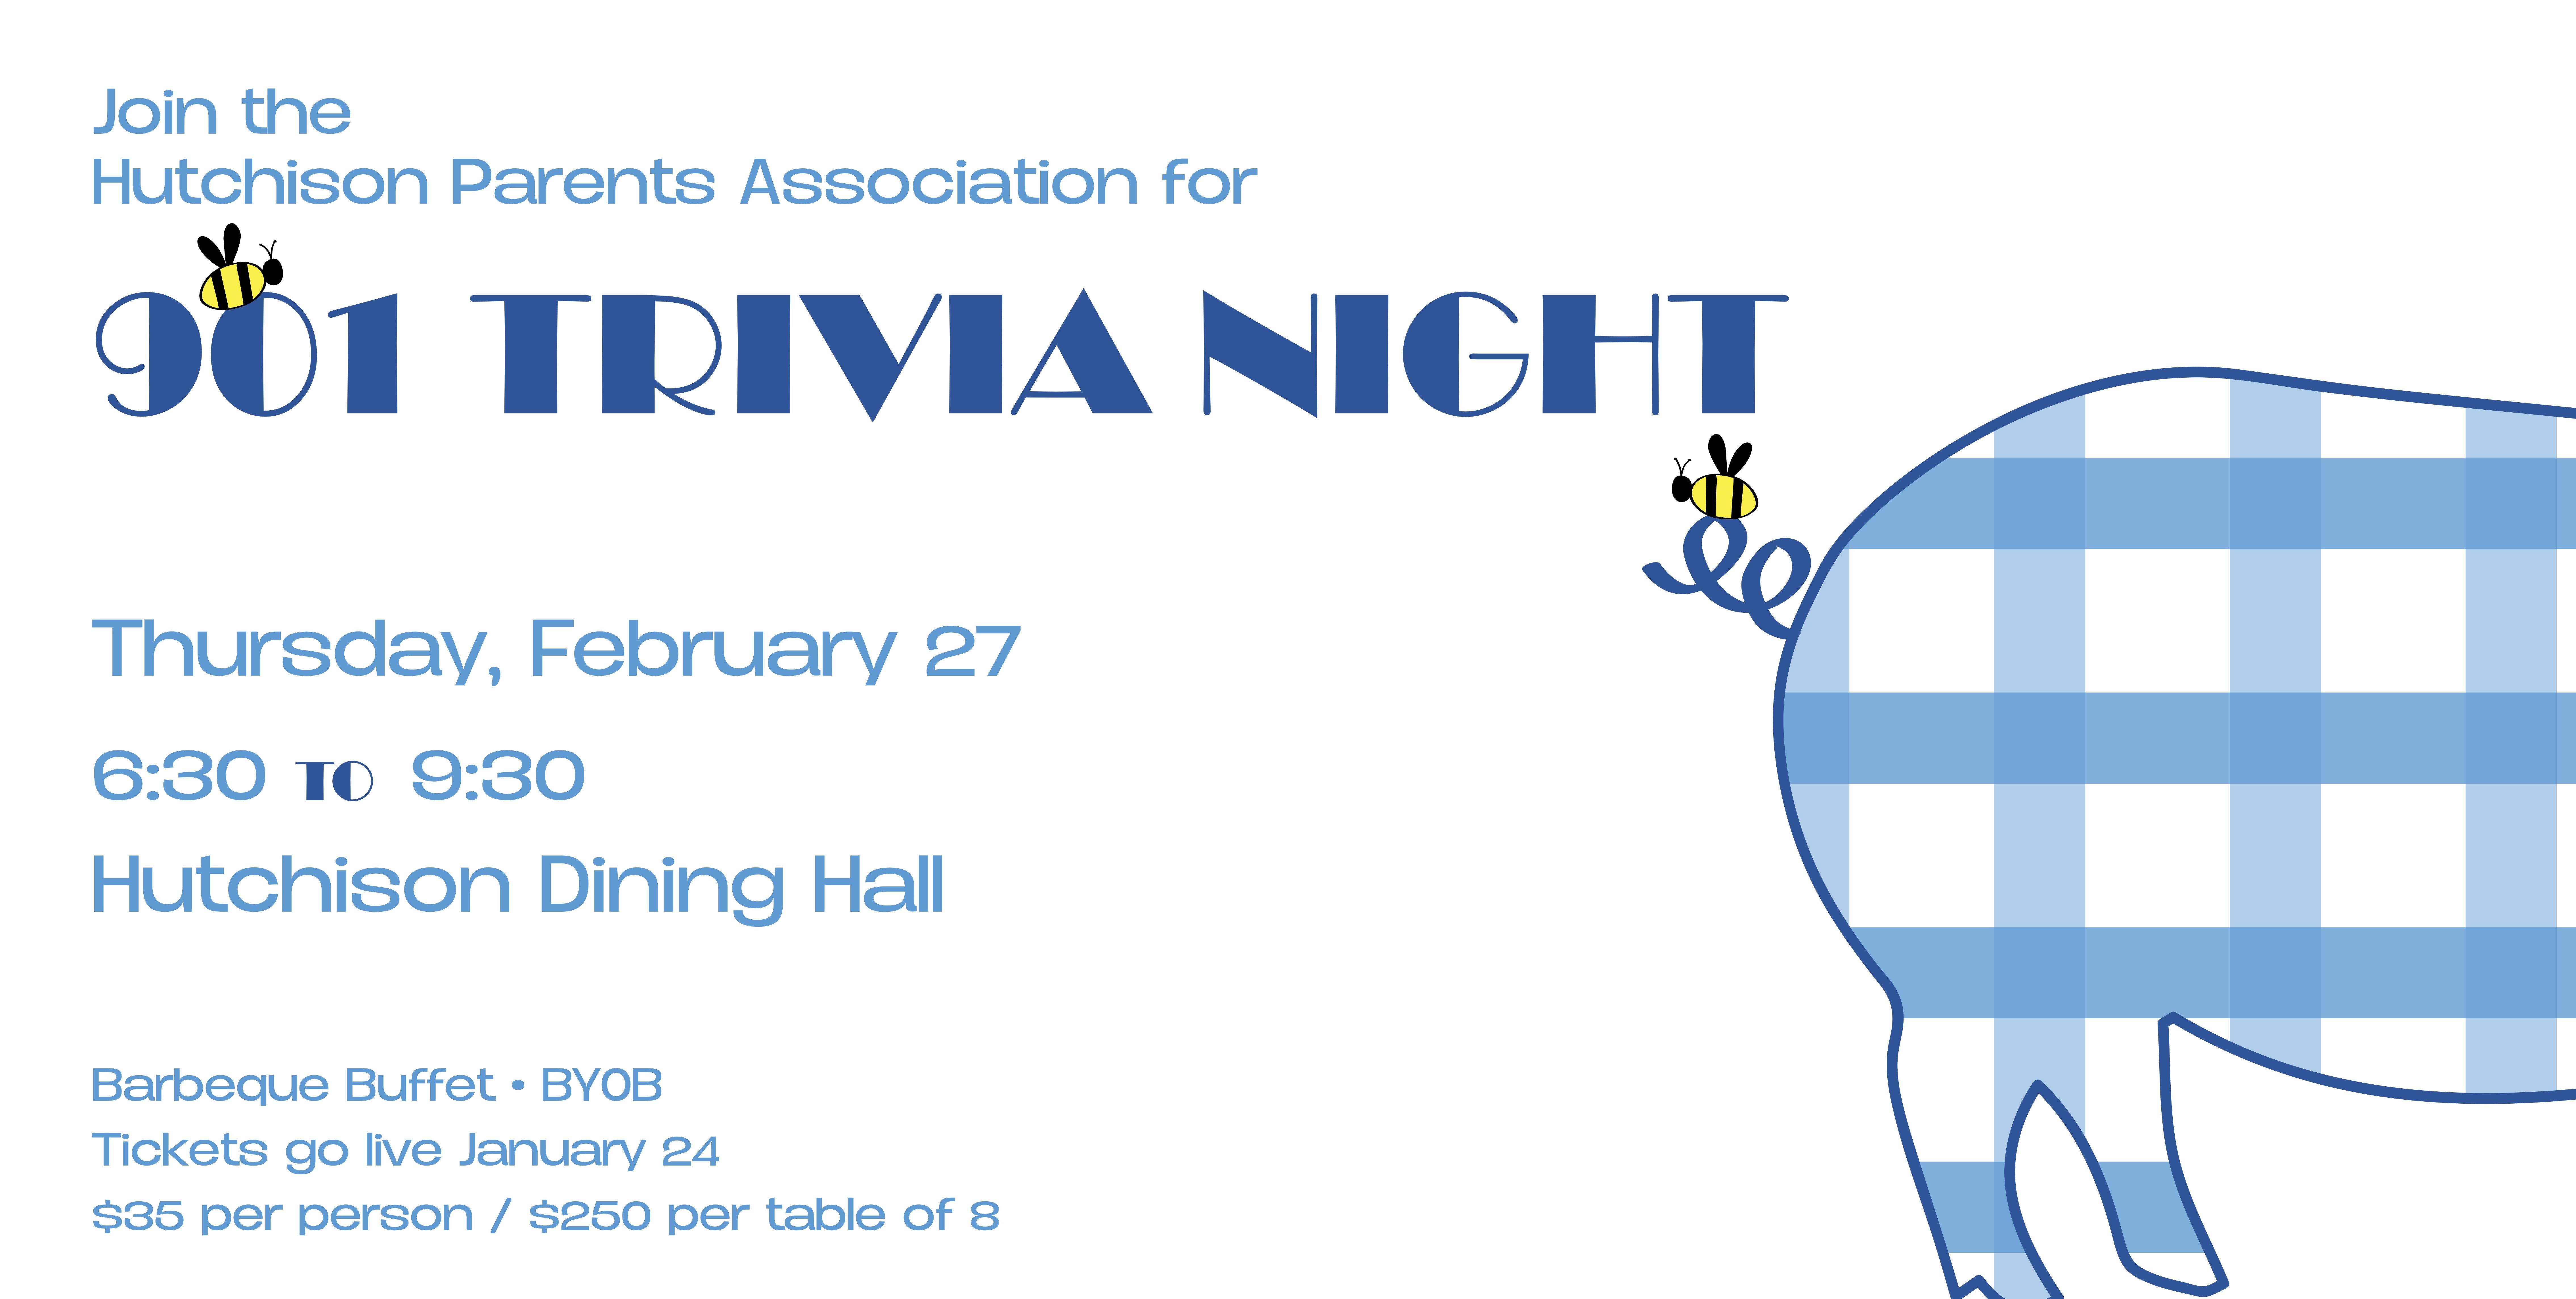 HPA Trivia Night in the 901